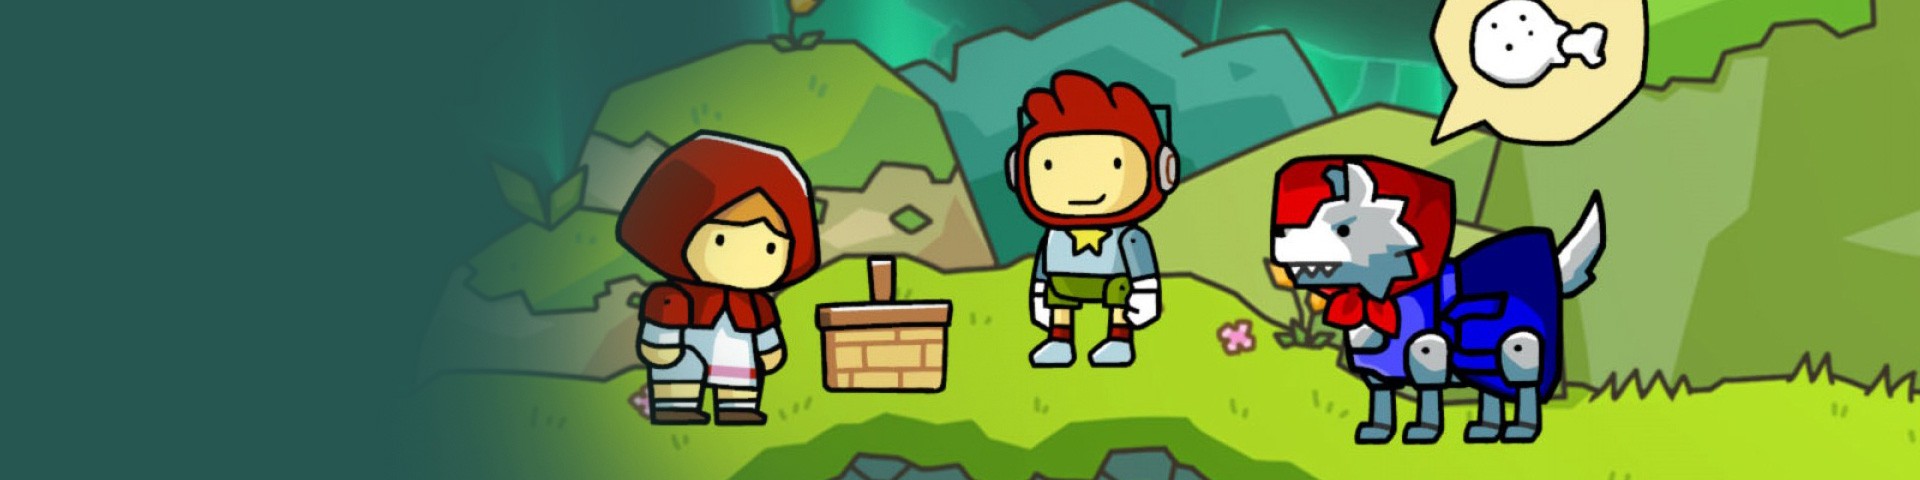 scribblenauts unlimited free download pc